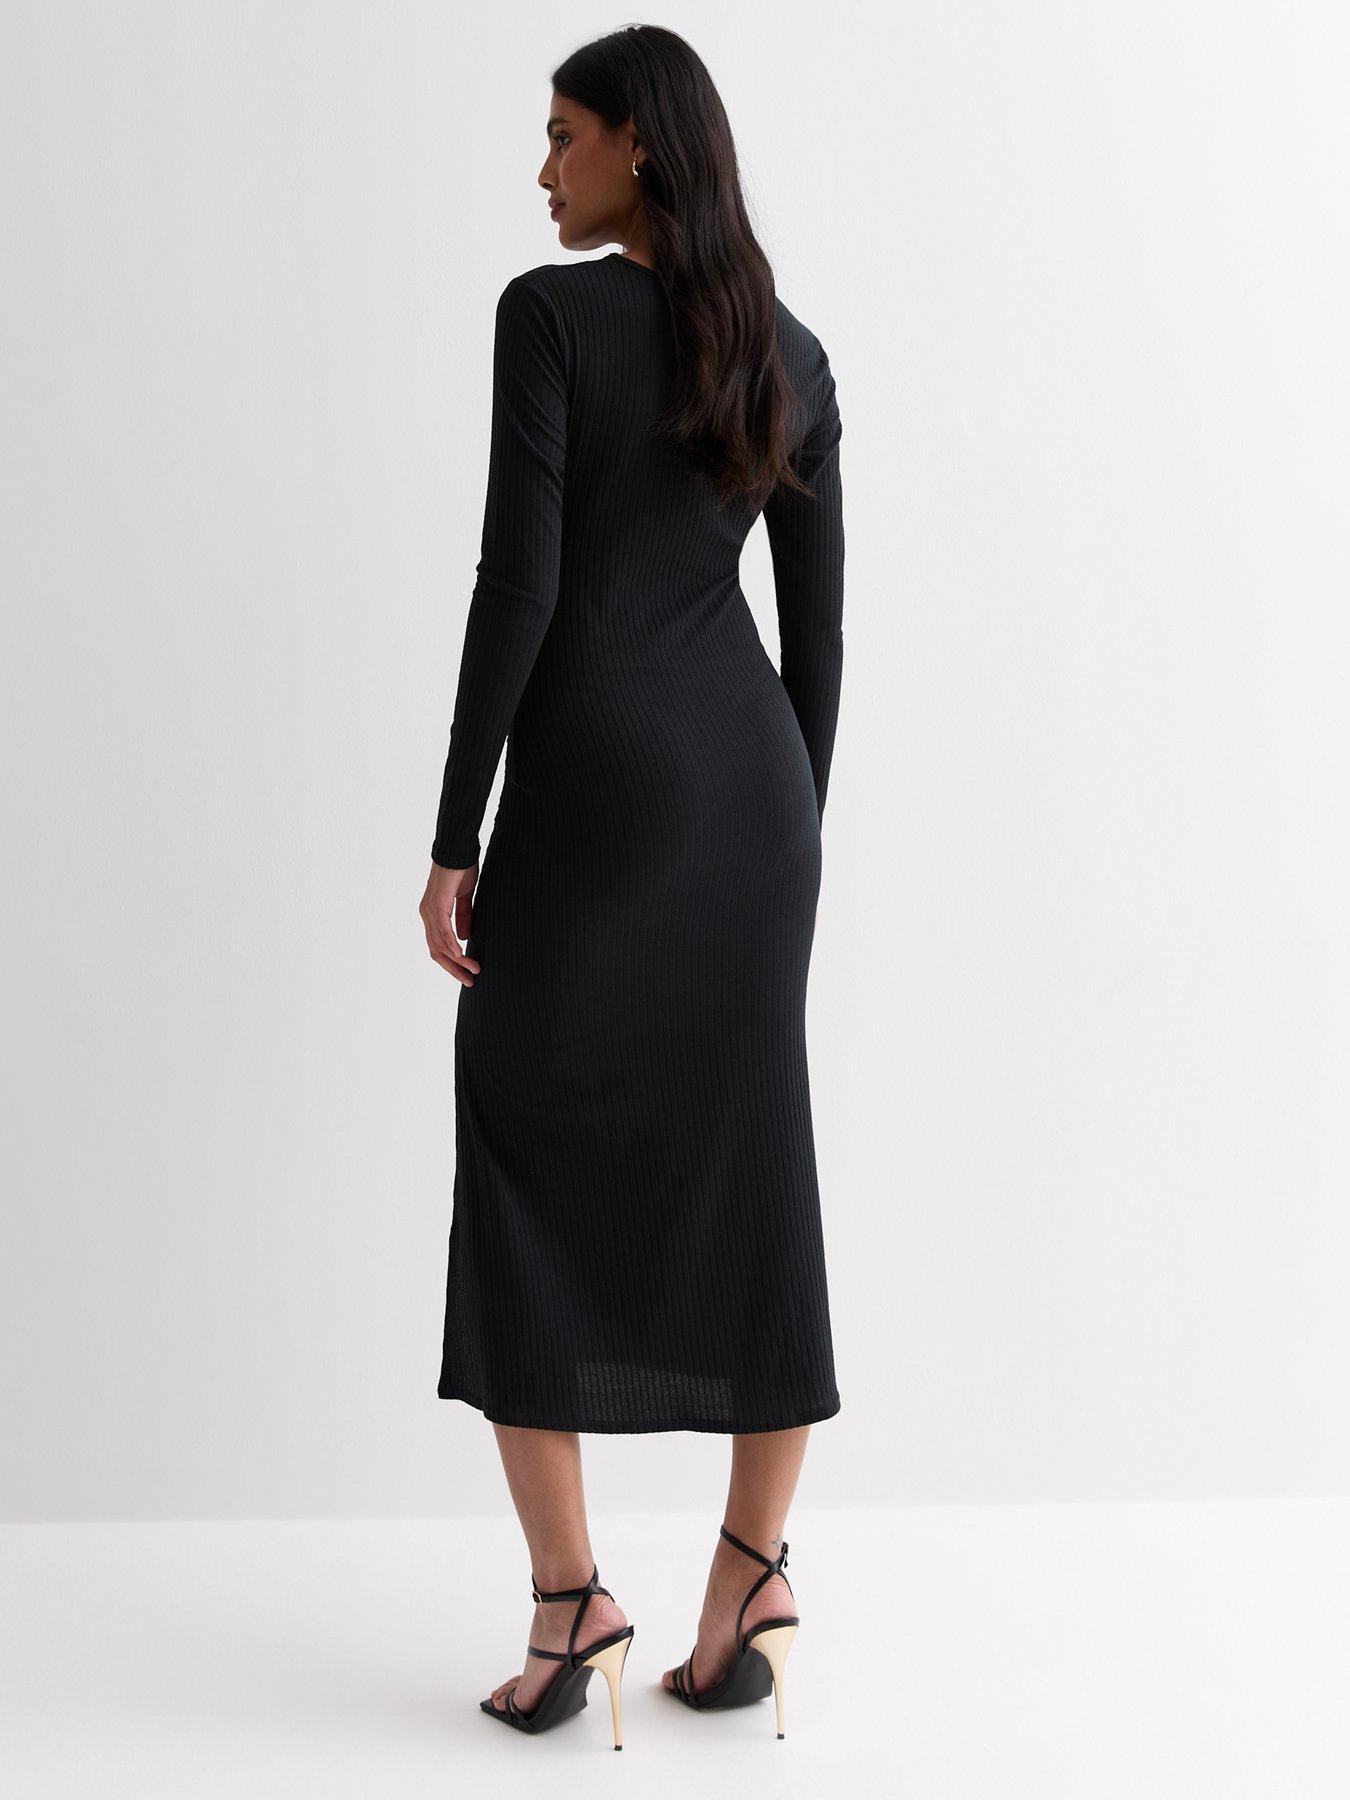 Petite Black Ribbed Ruched Racer Dress